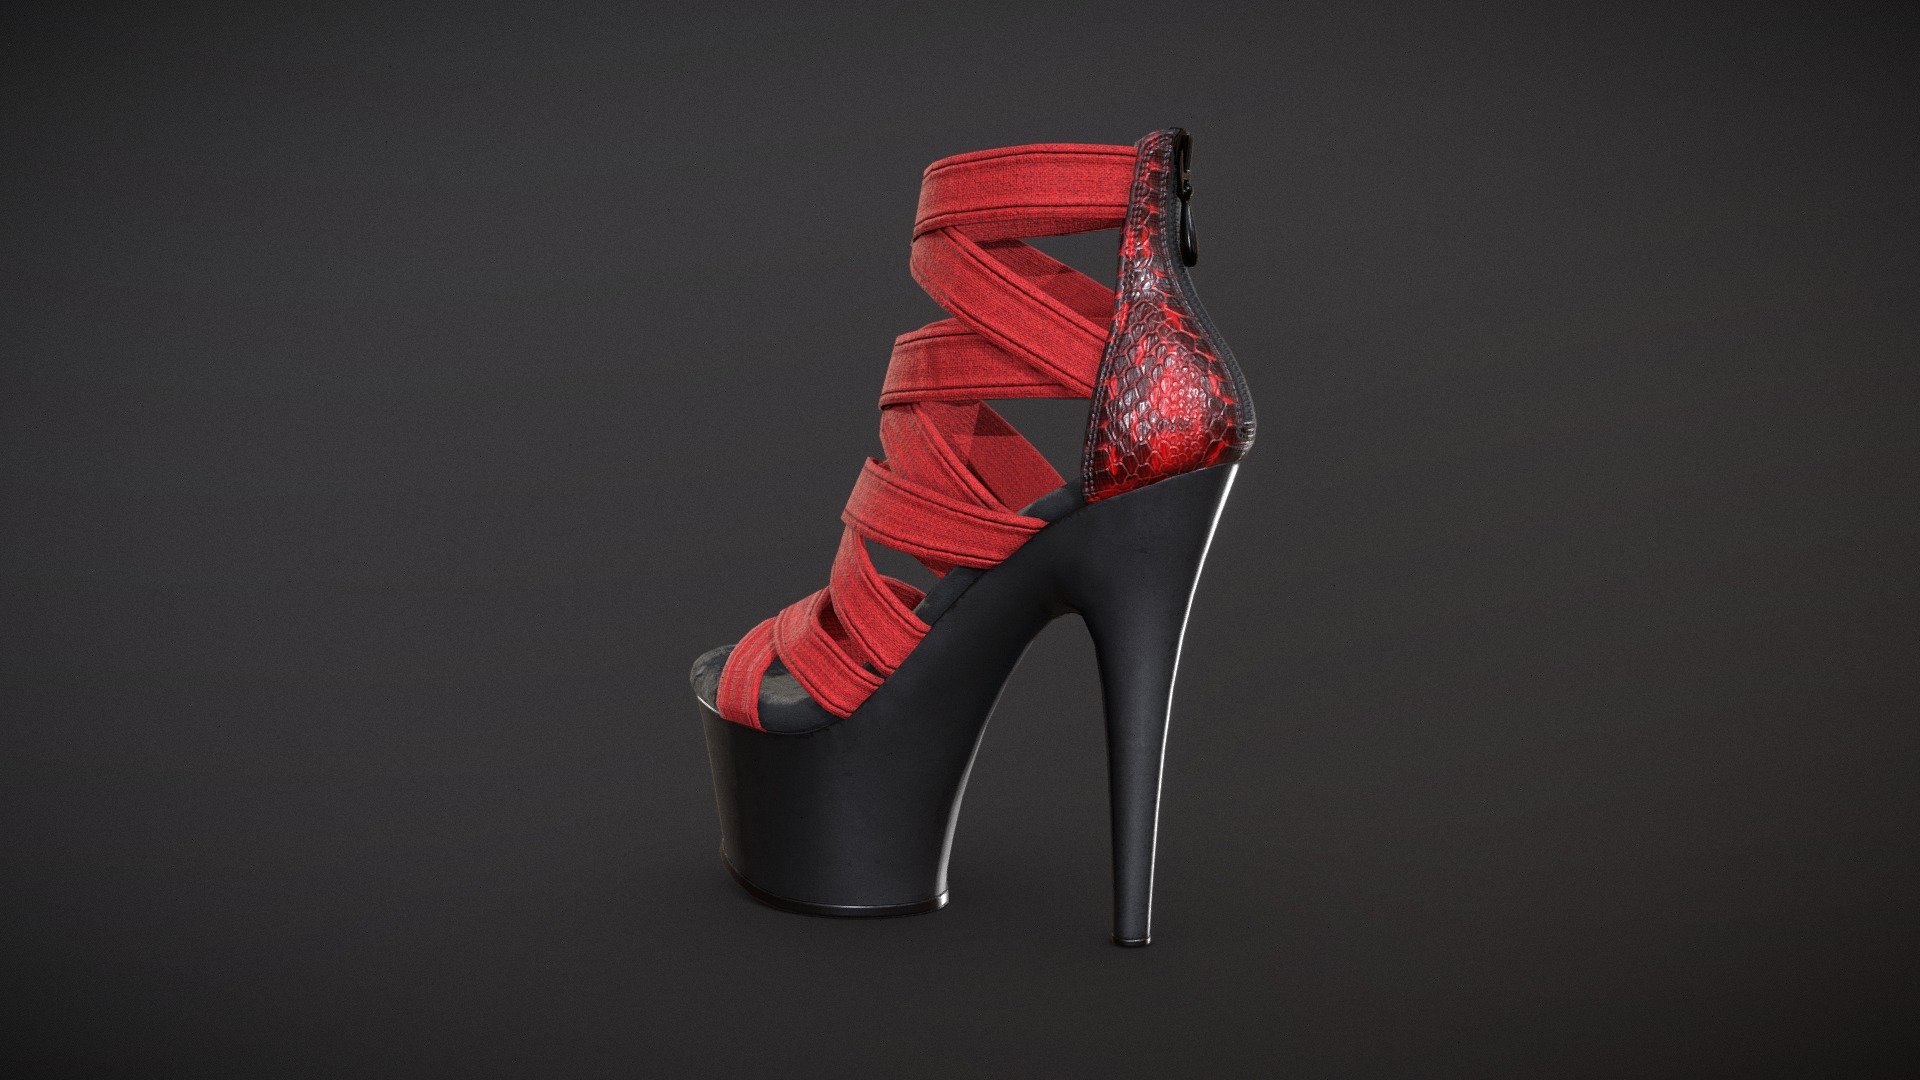 Banded Platform Stiletto Shoes 2

Game and production ready, polycount optimized for quality, ideal for high quality Characters and Close-Ups

Internal parts modeled and textured, ideal for customization or animation

Basemesh model not included

Single UV space

PBR and UE4 4k Textures

Low Poly has 2.6k quads

FBX, OBJ, ZTL

Includes 5 Color Variations:

Red / Yellow / Pink / Teal / White - Banded Platform Stiletto Shoes 2 - Buy Royalty Free 3D model by Feds452 3d model